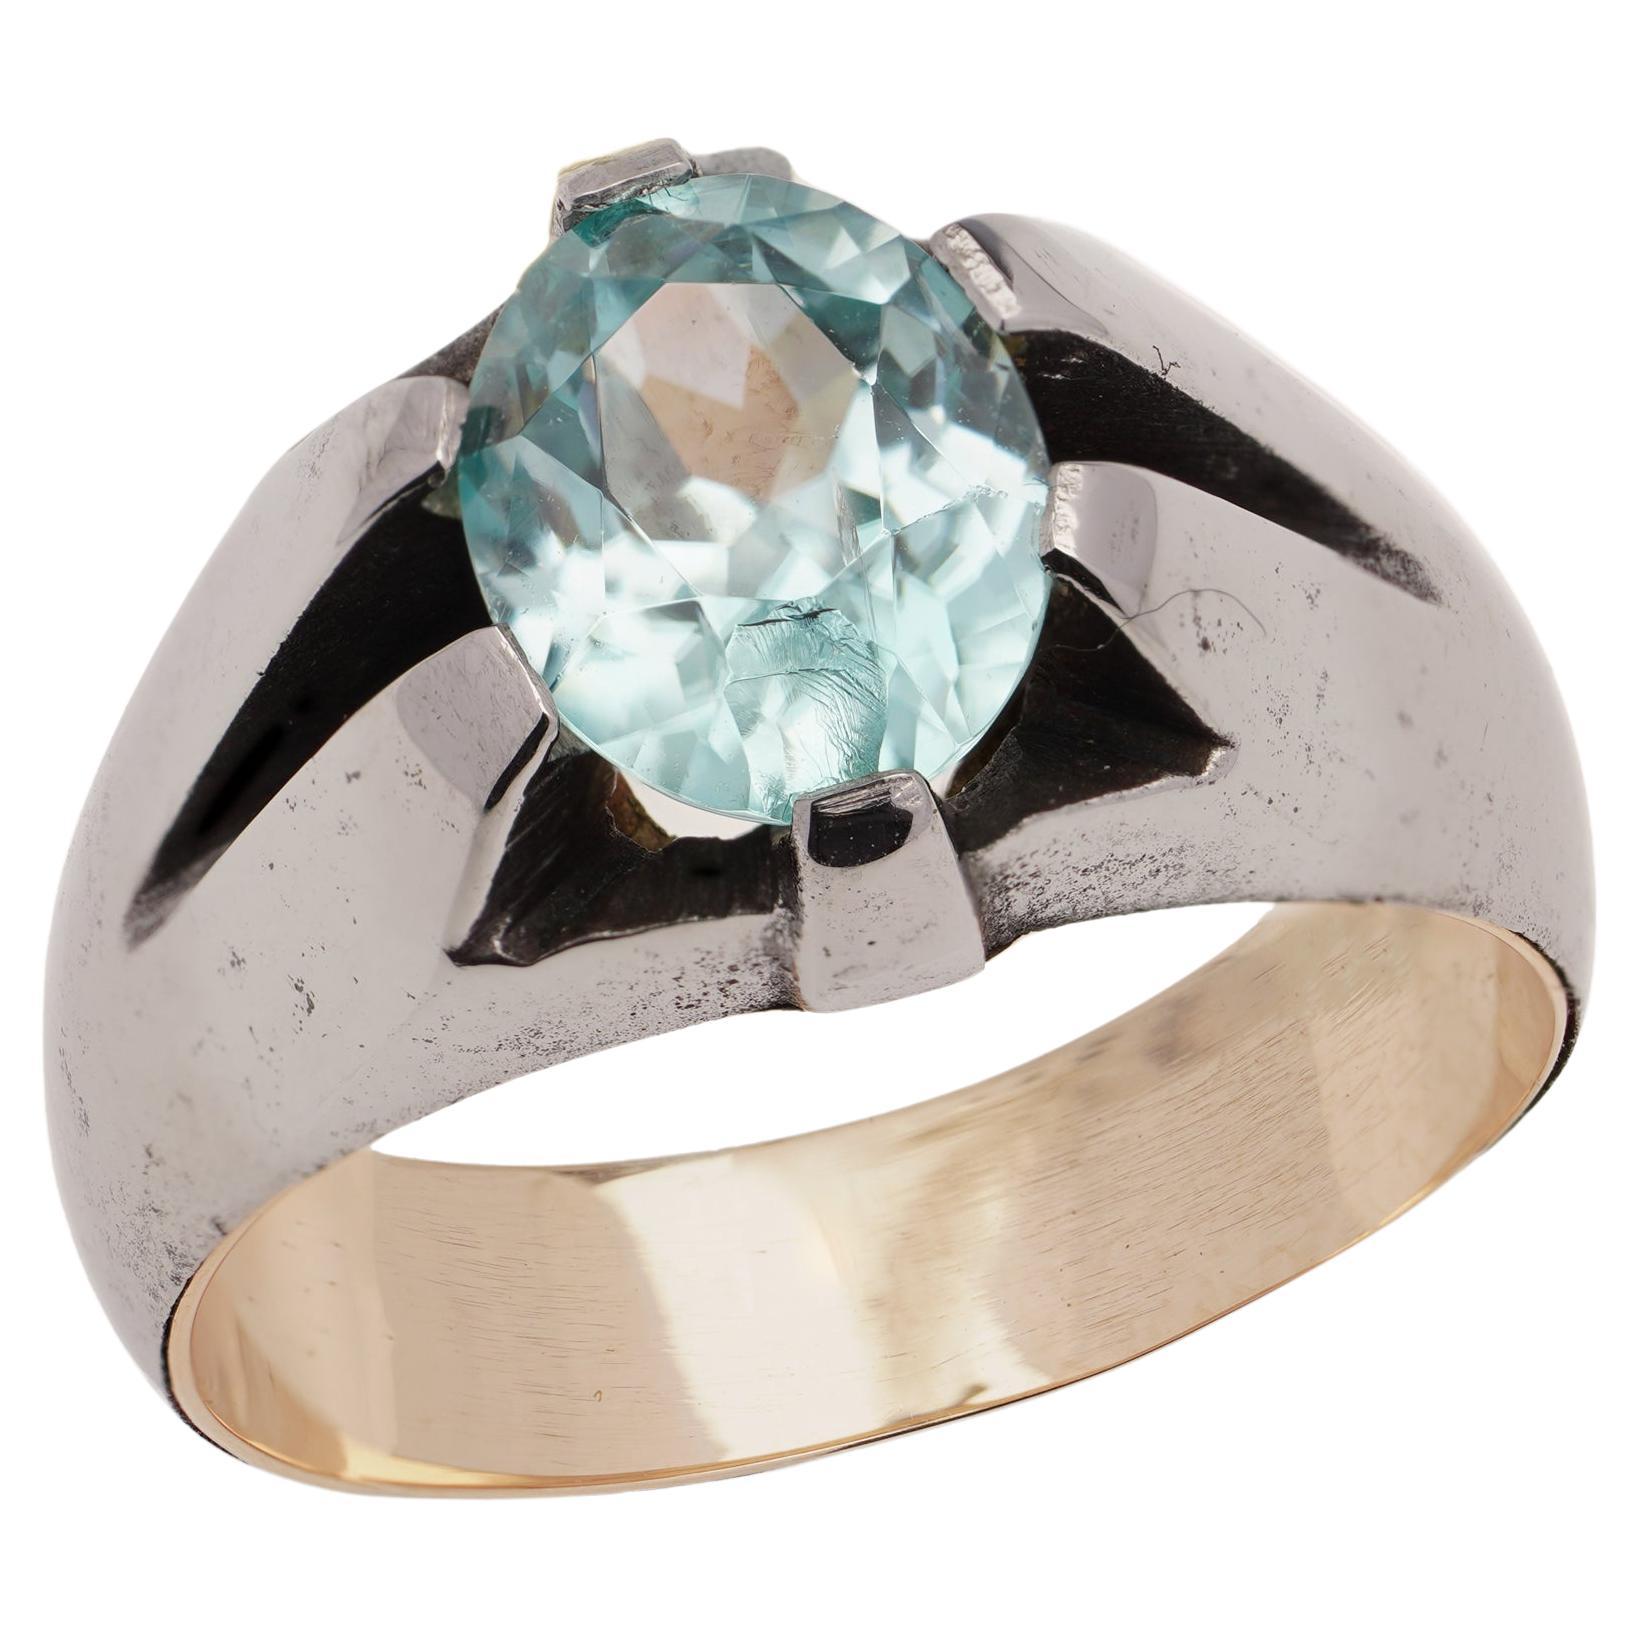 9kt pink gold and iron ring set with oval faceted 1.40 ct. blue topaz.